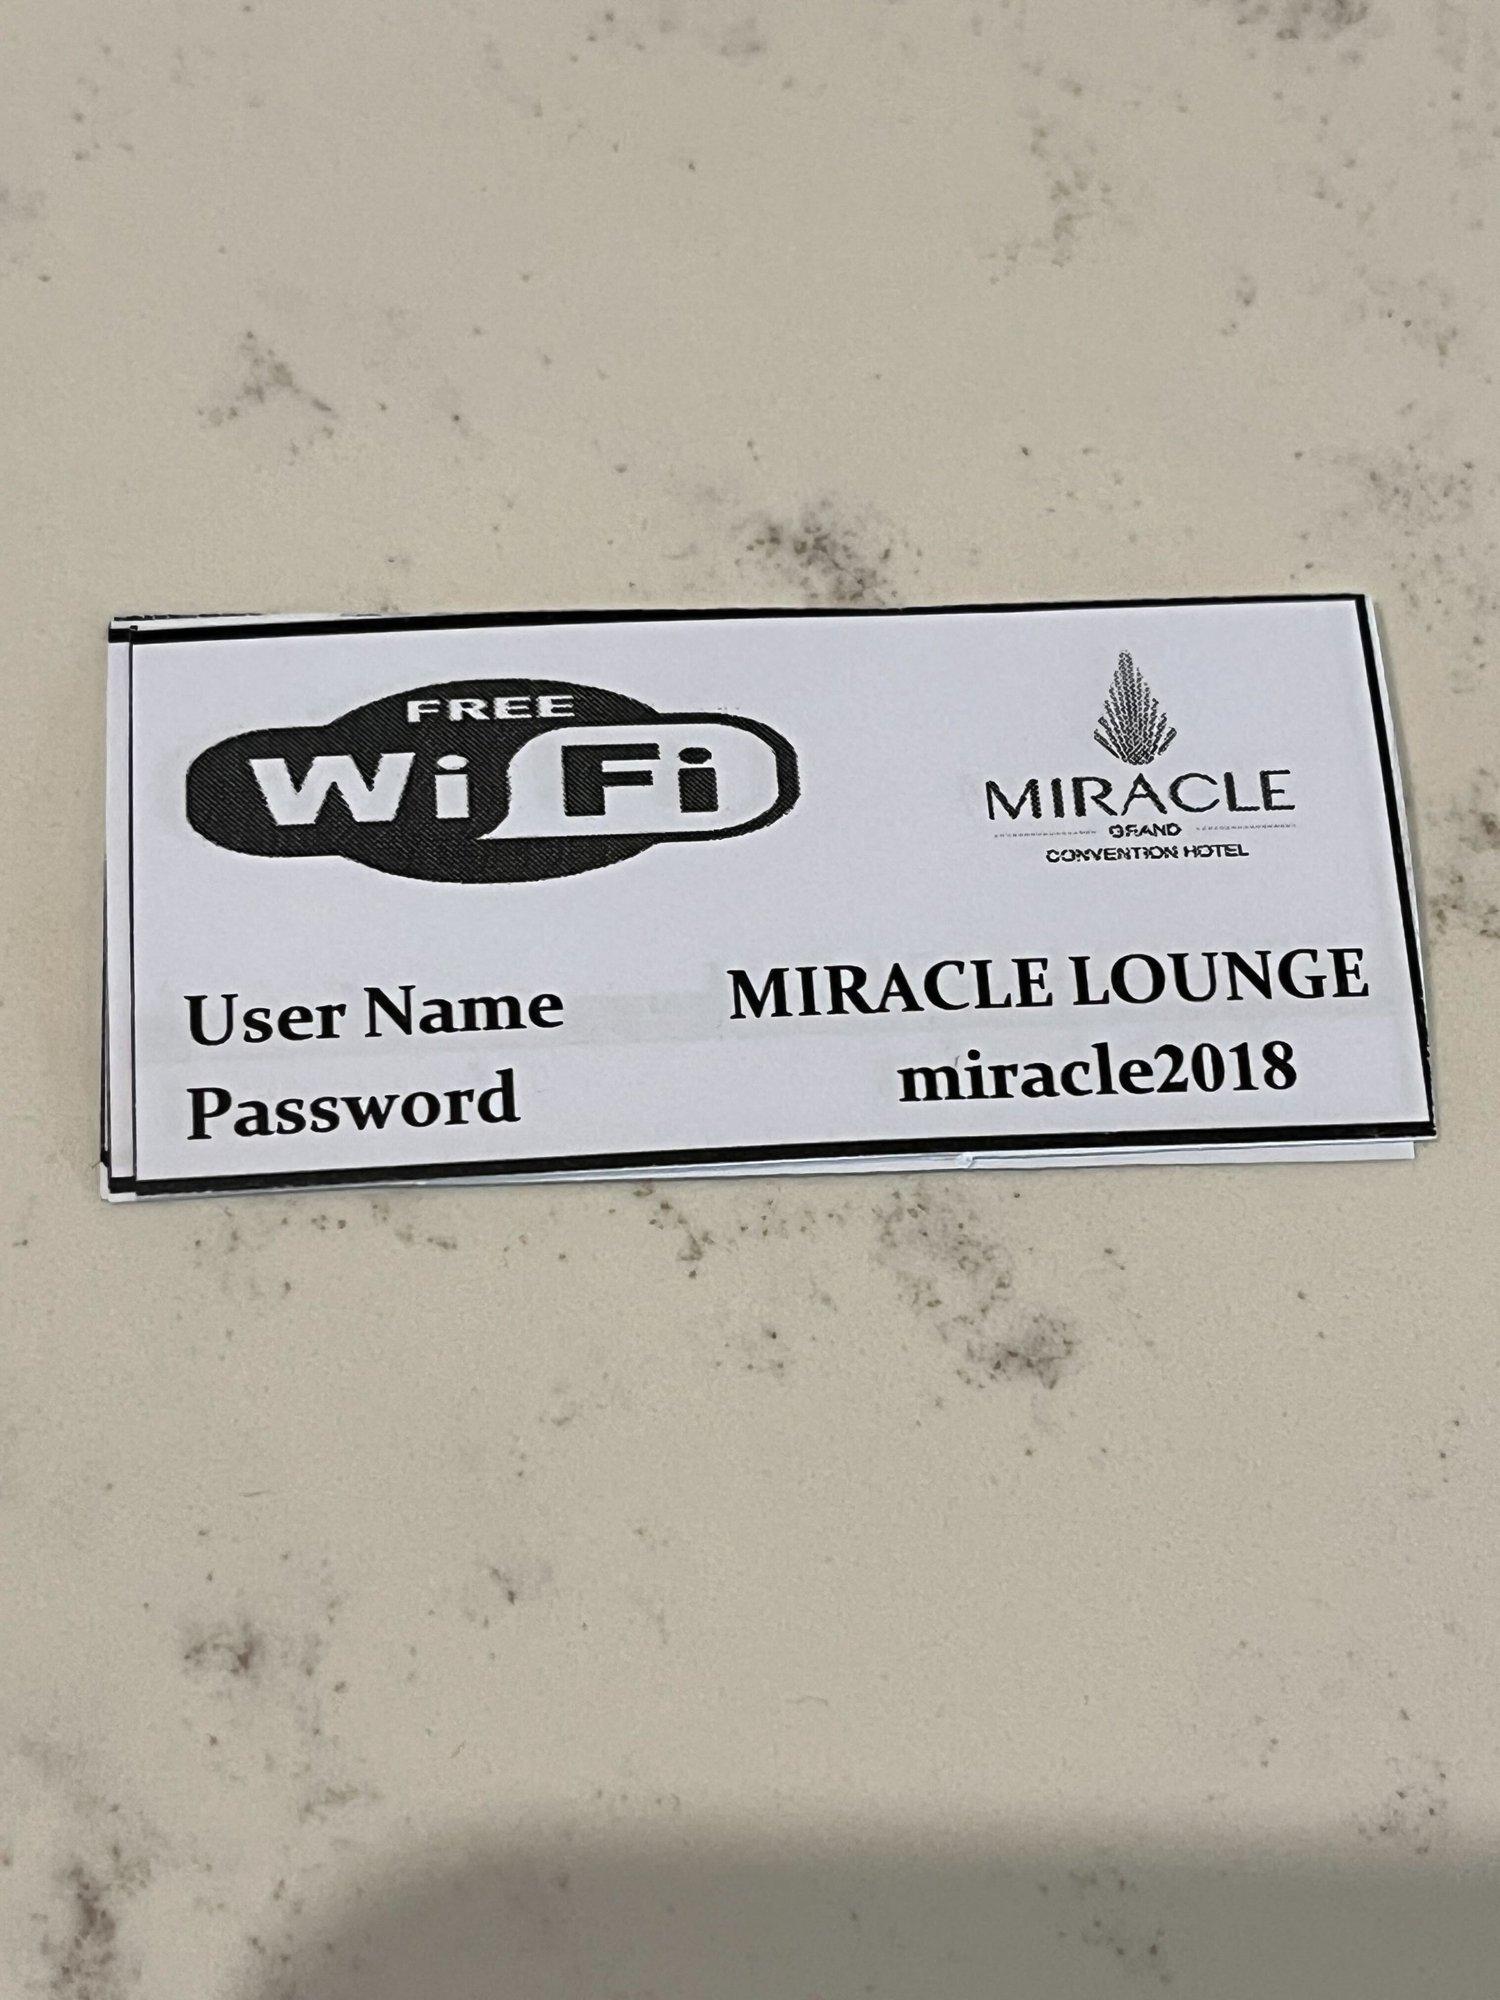 Miracle Lounge image 39 of 59